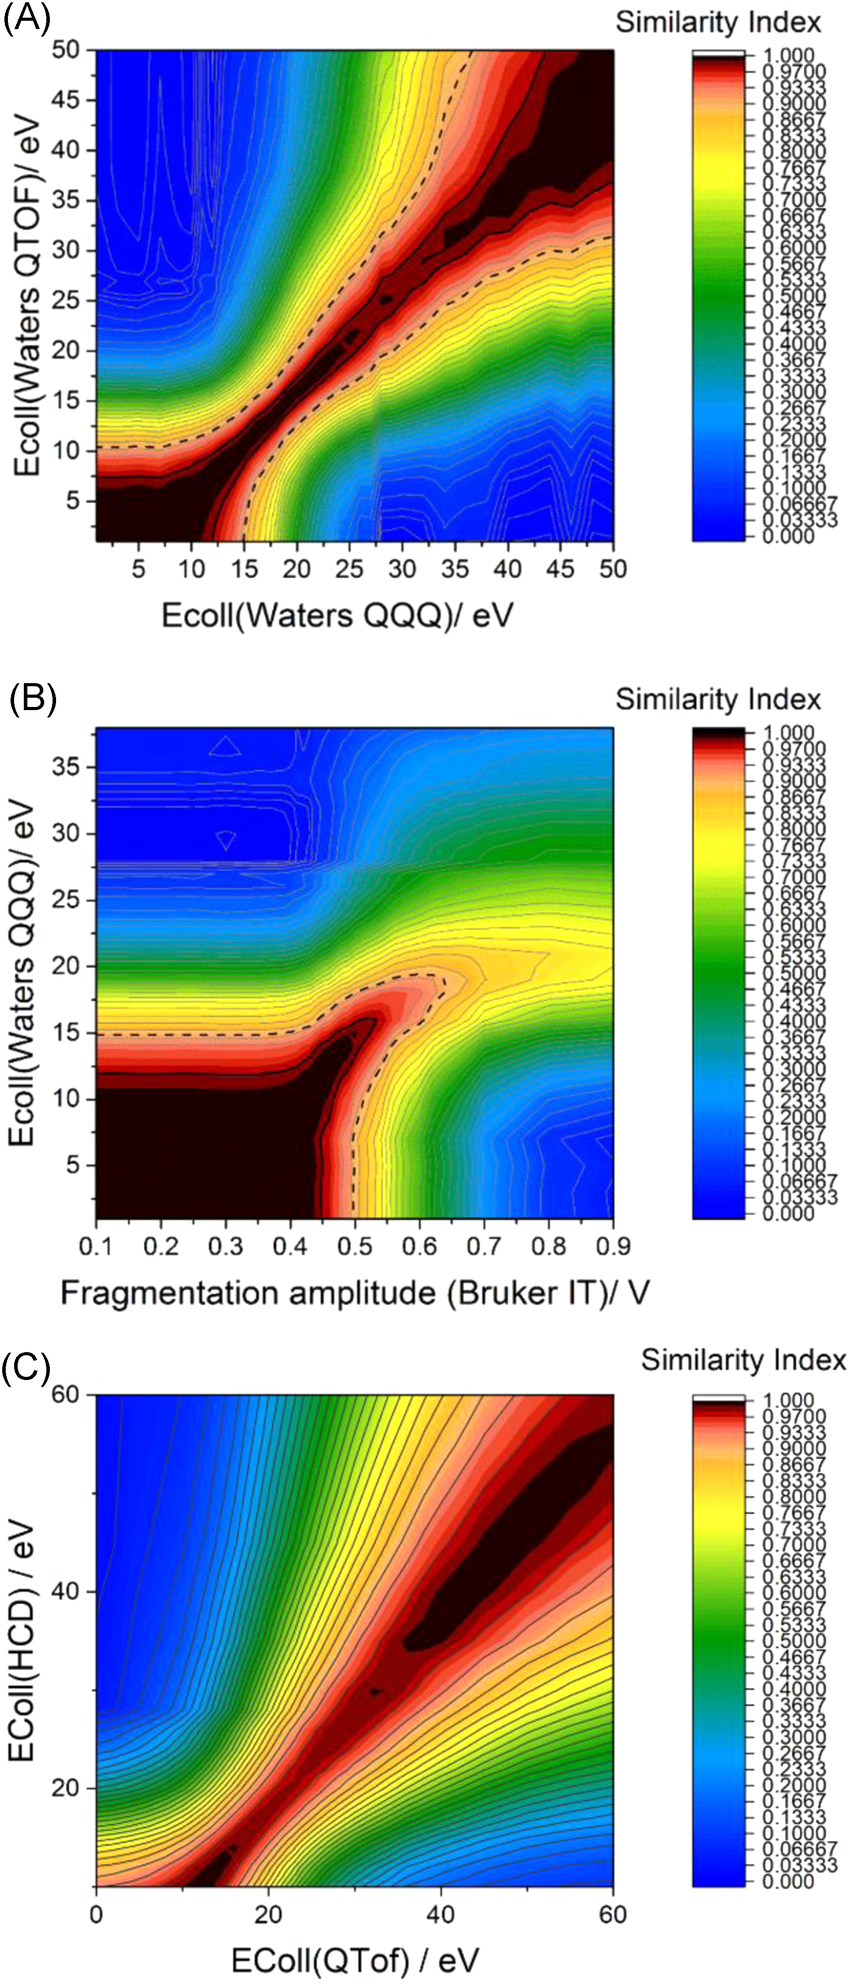 Similarity of tandem mass spectra shown as a “heat map” for all combinations of collision energies determined on (A) Waters QTof and Waters QQQ, (B) Waters QQQ and Bruker ion trap, and (C) Thermo Orbitrap and Bruker QTof instruments. Figures taken from references Bazsó et al. (2016) and Szabó et al. (2021) with permission